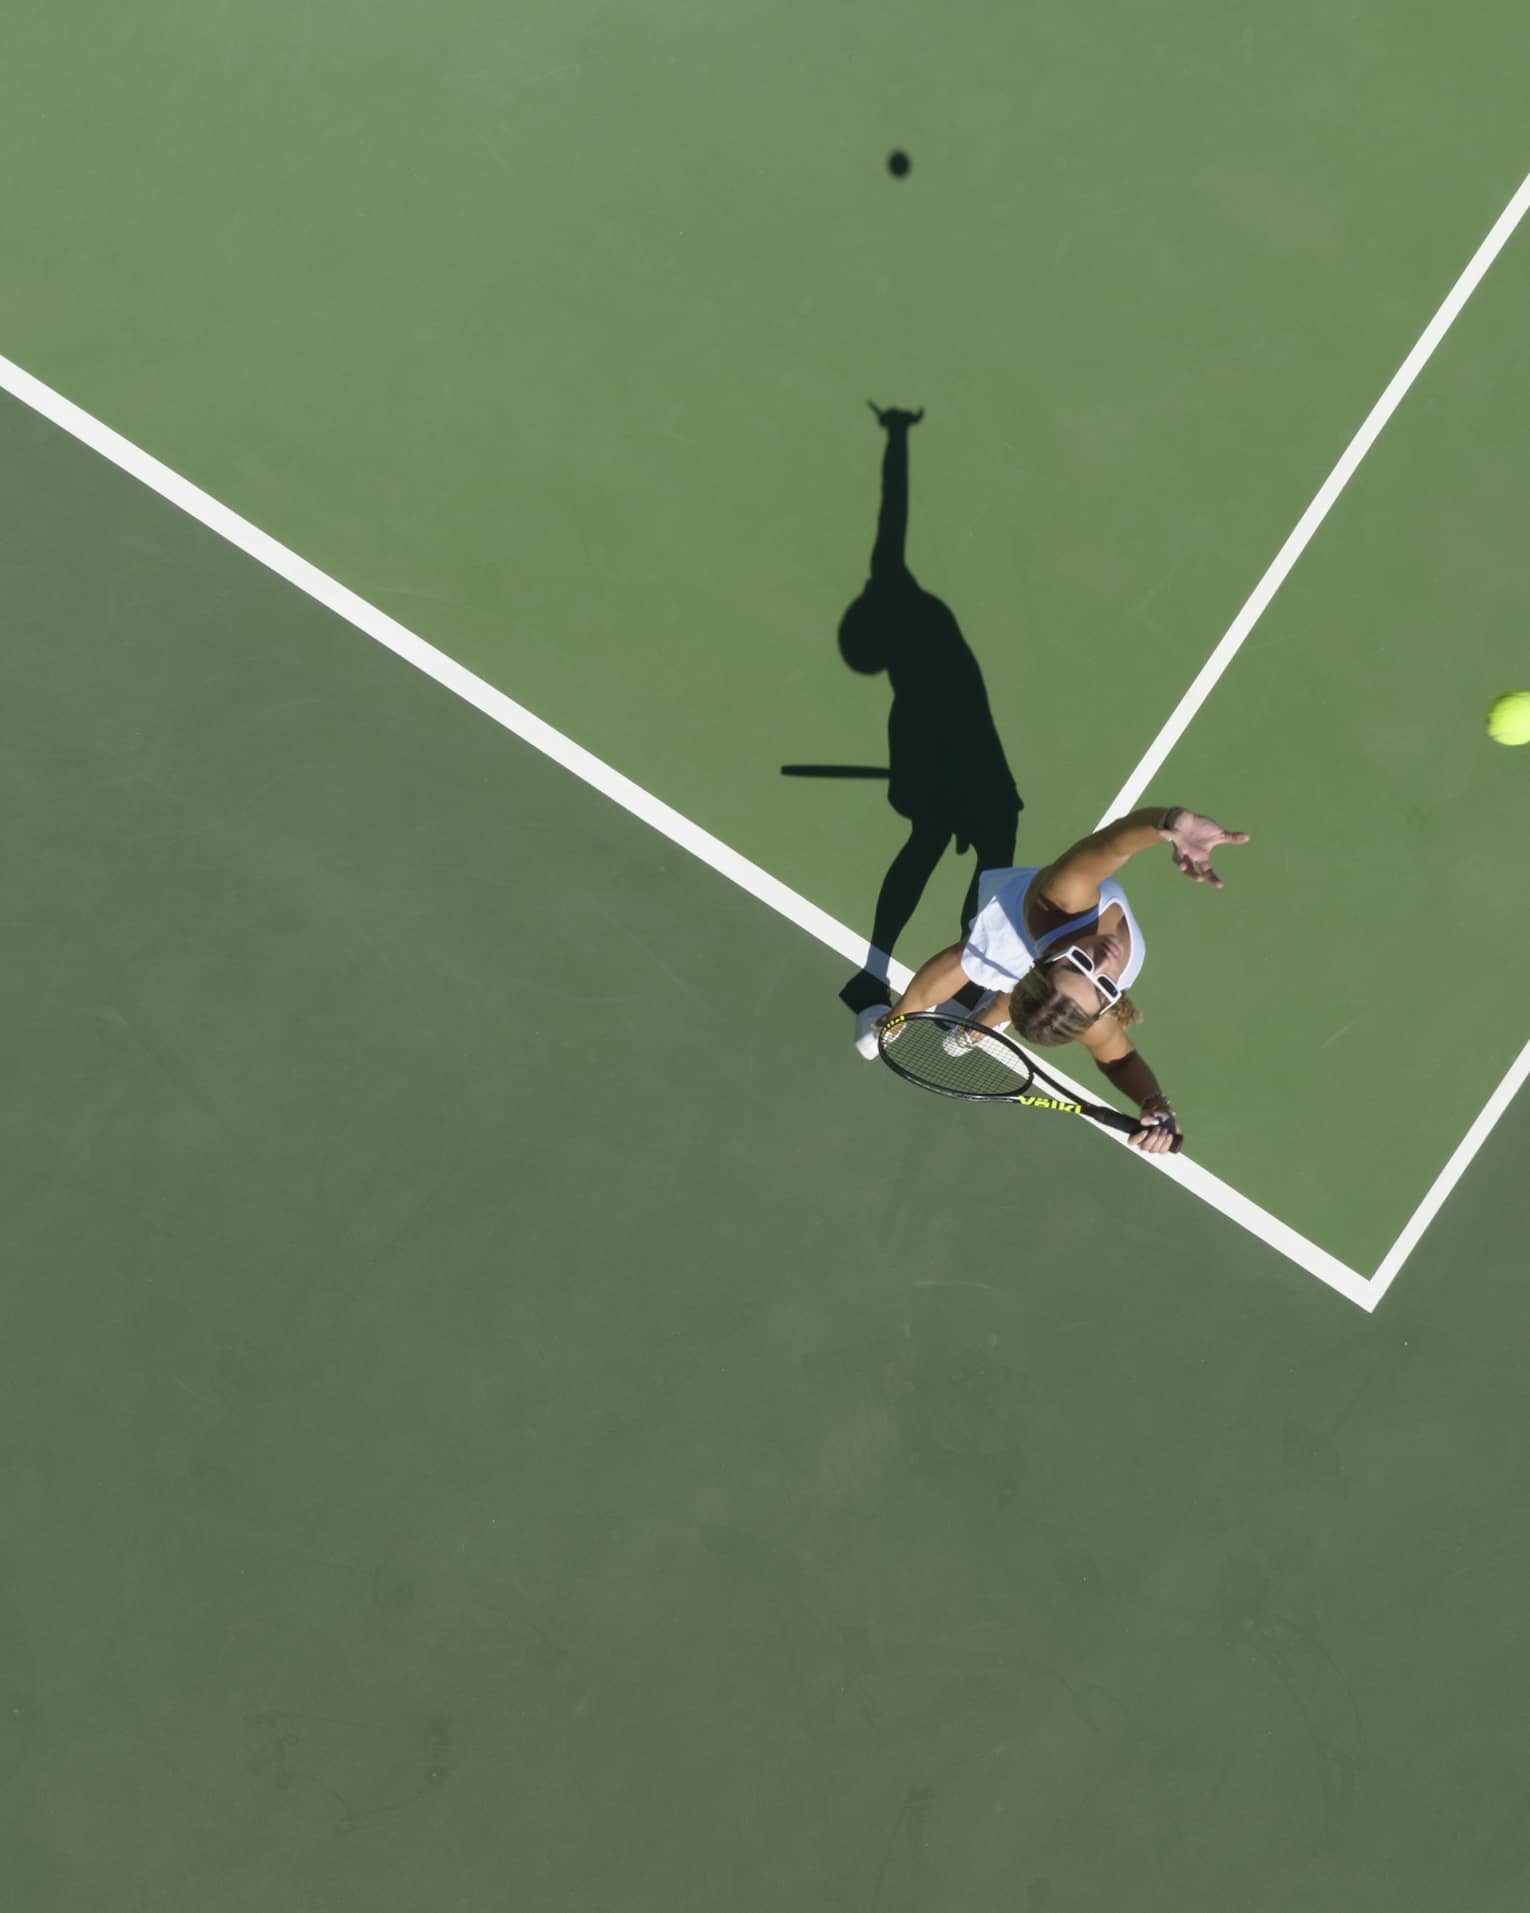 Aerial view of a tennis player mid serve